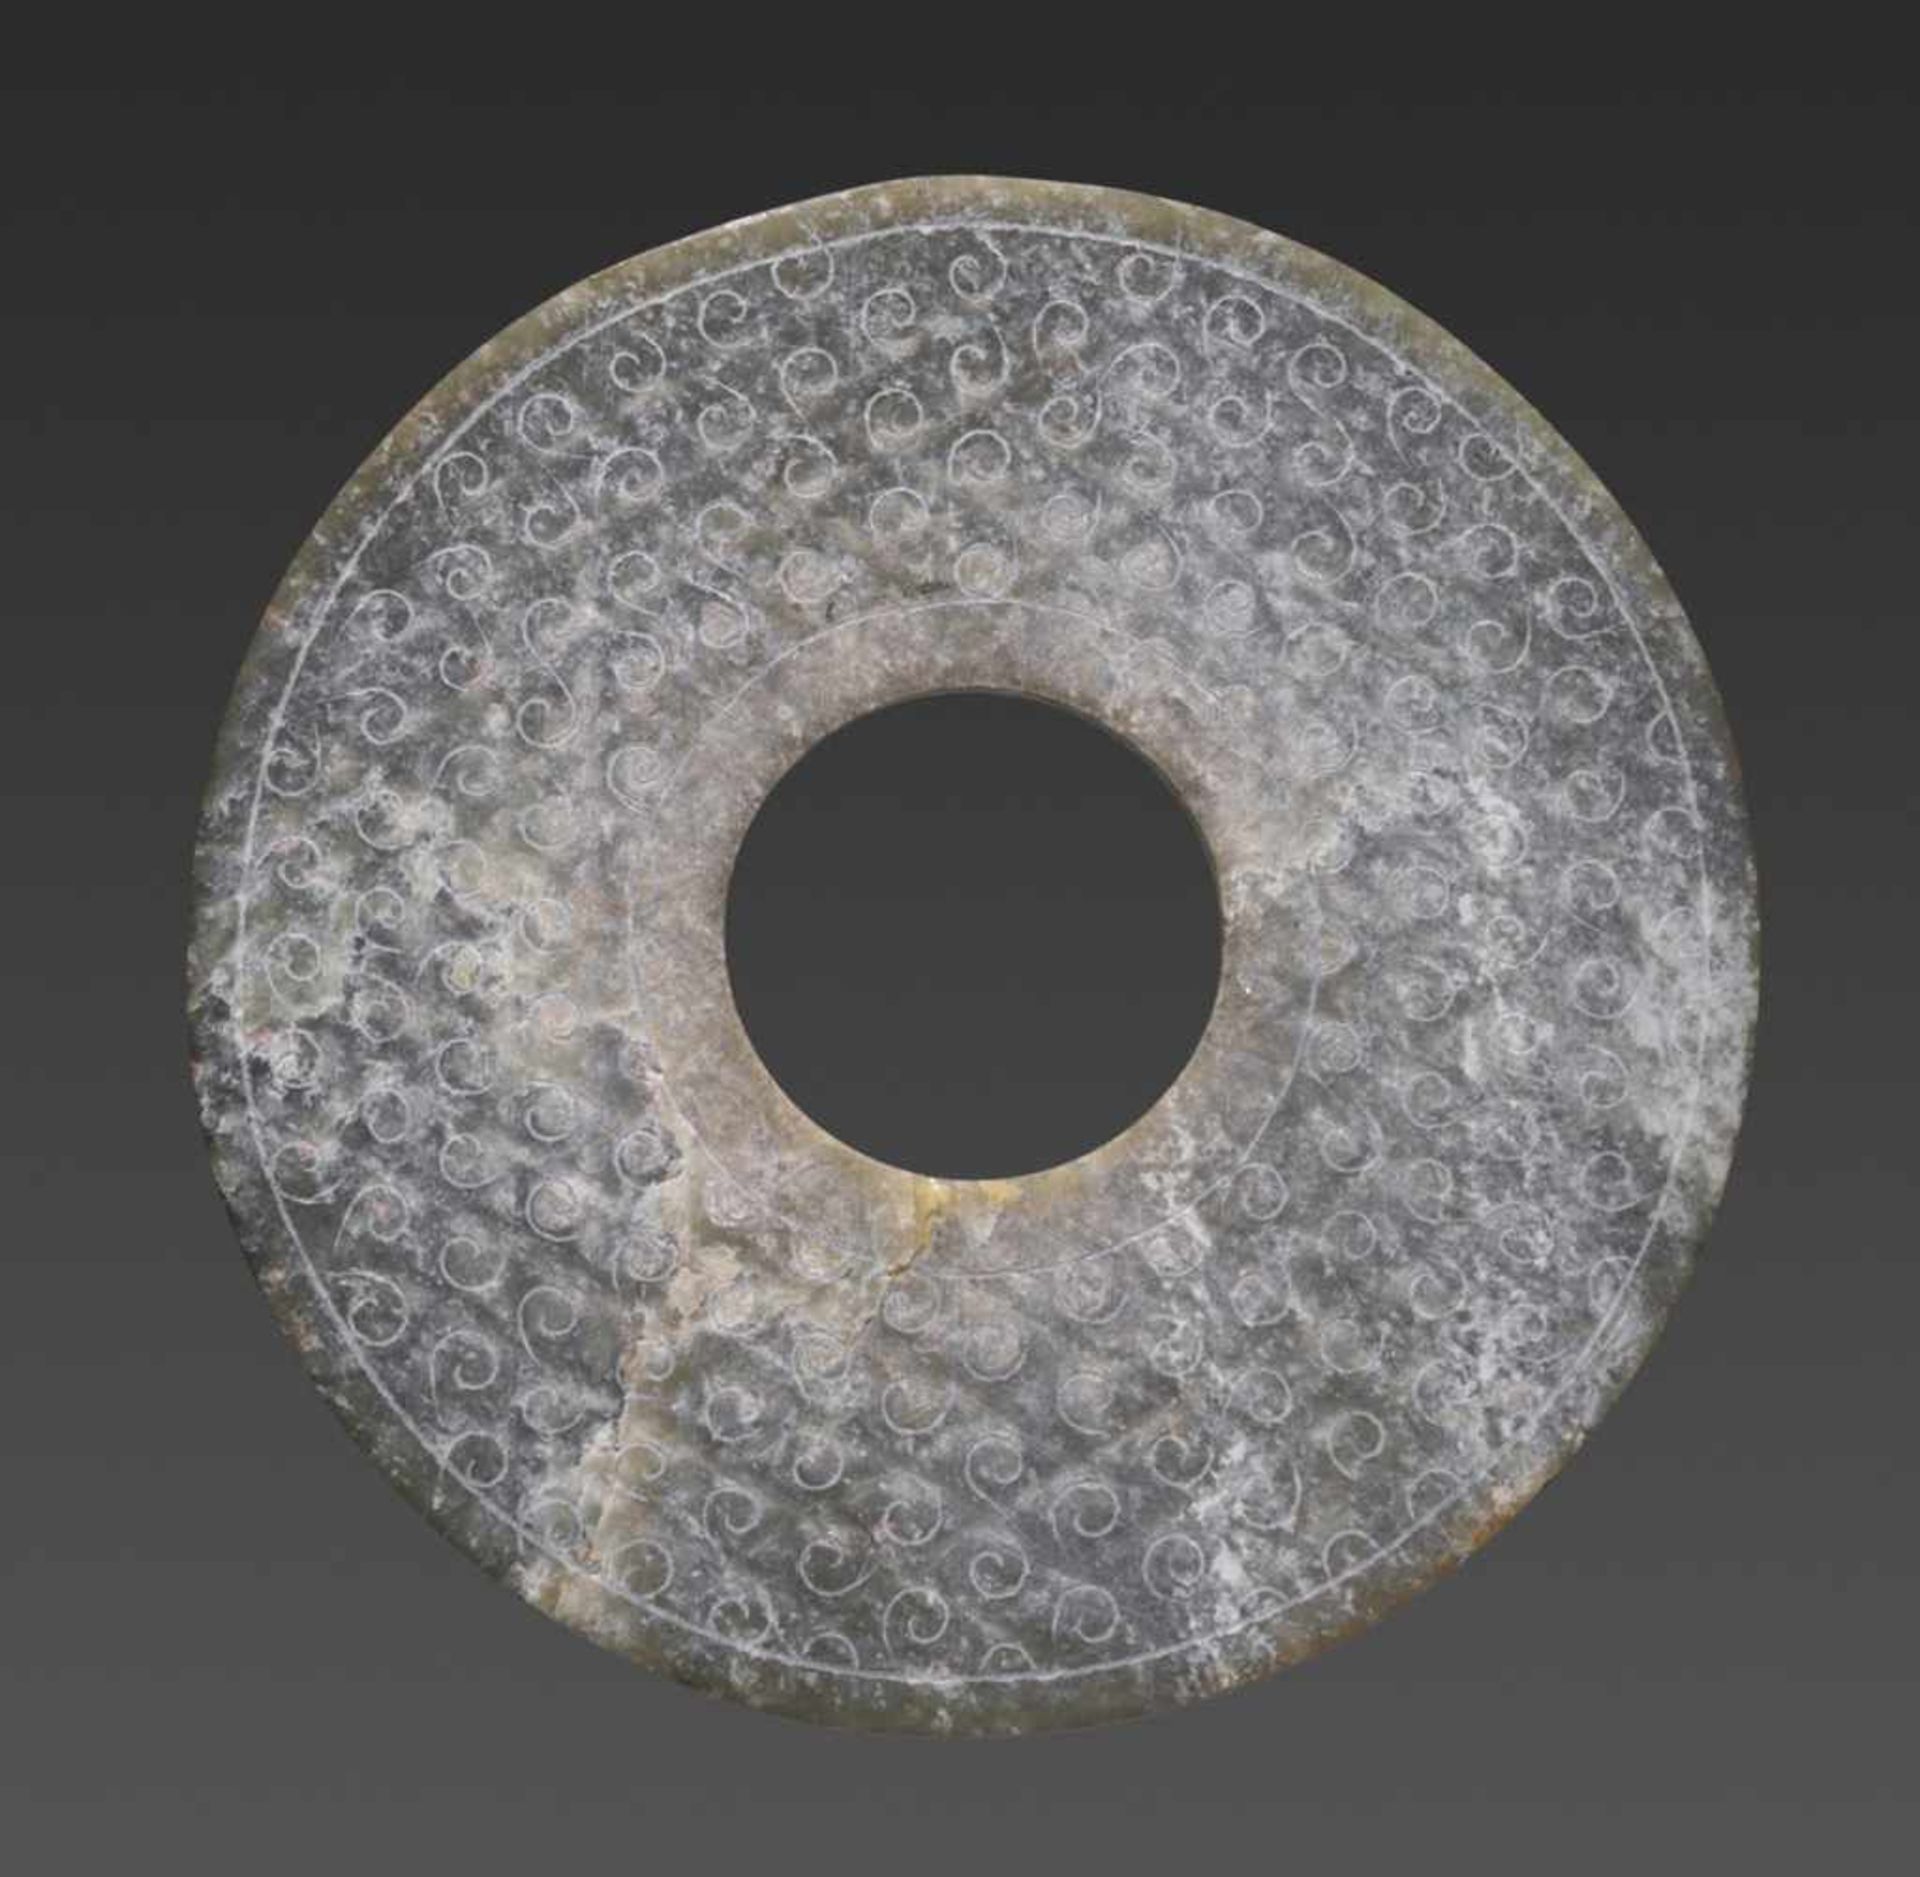 A REFINED CHARCOAL GREY DISC WITH ENGRAVED CURLS Jade. China, Han Dynasty, 2nd century BC 穀紋玉璧 - 漢代, - Bild 2 aus 8